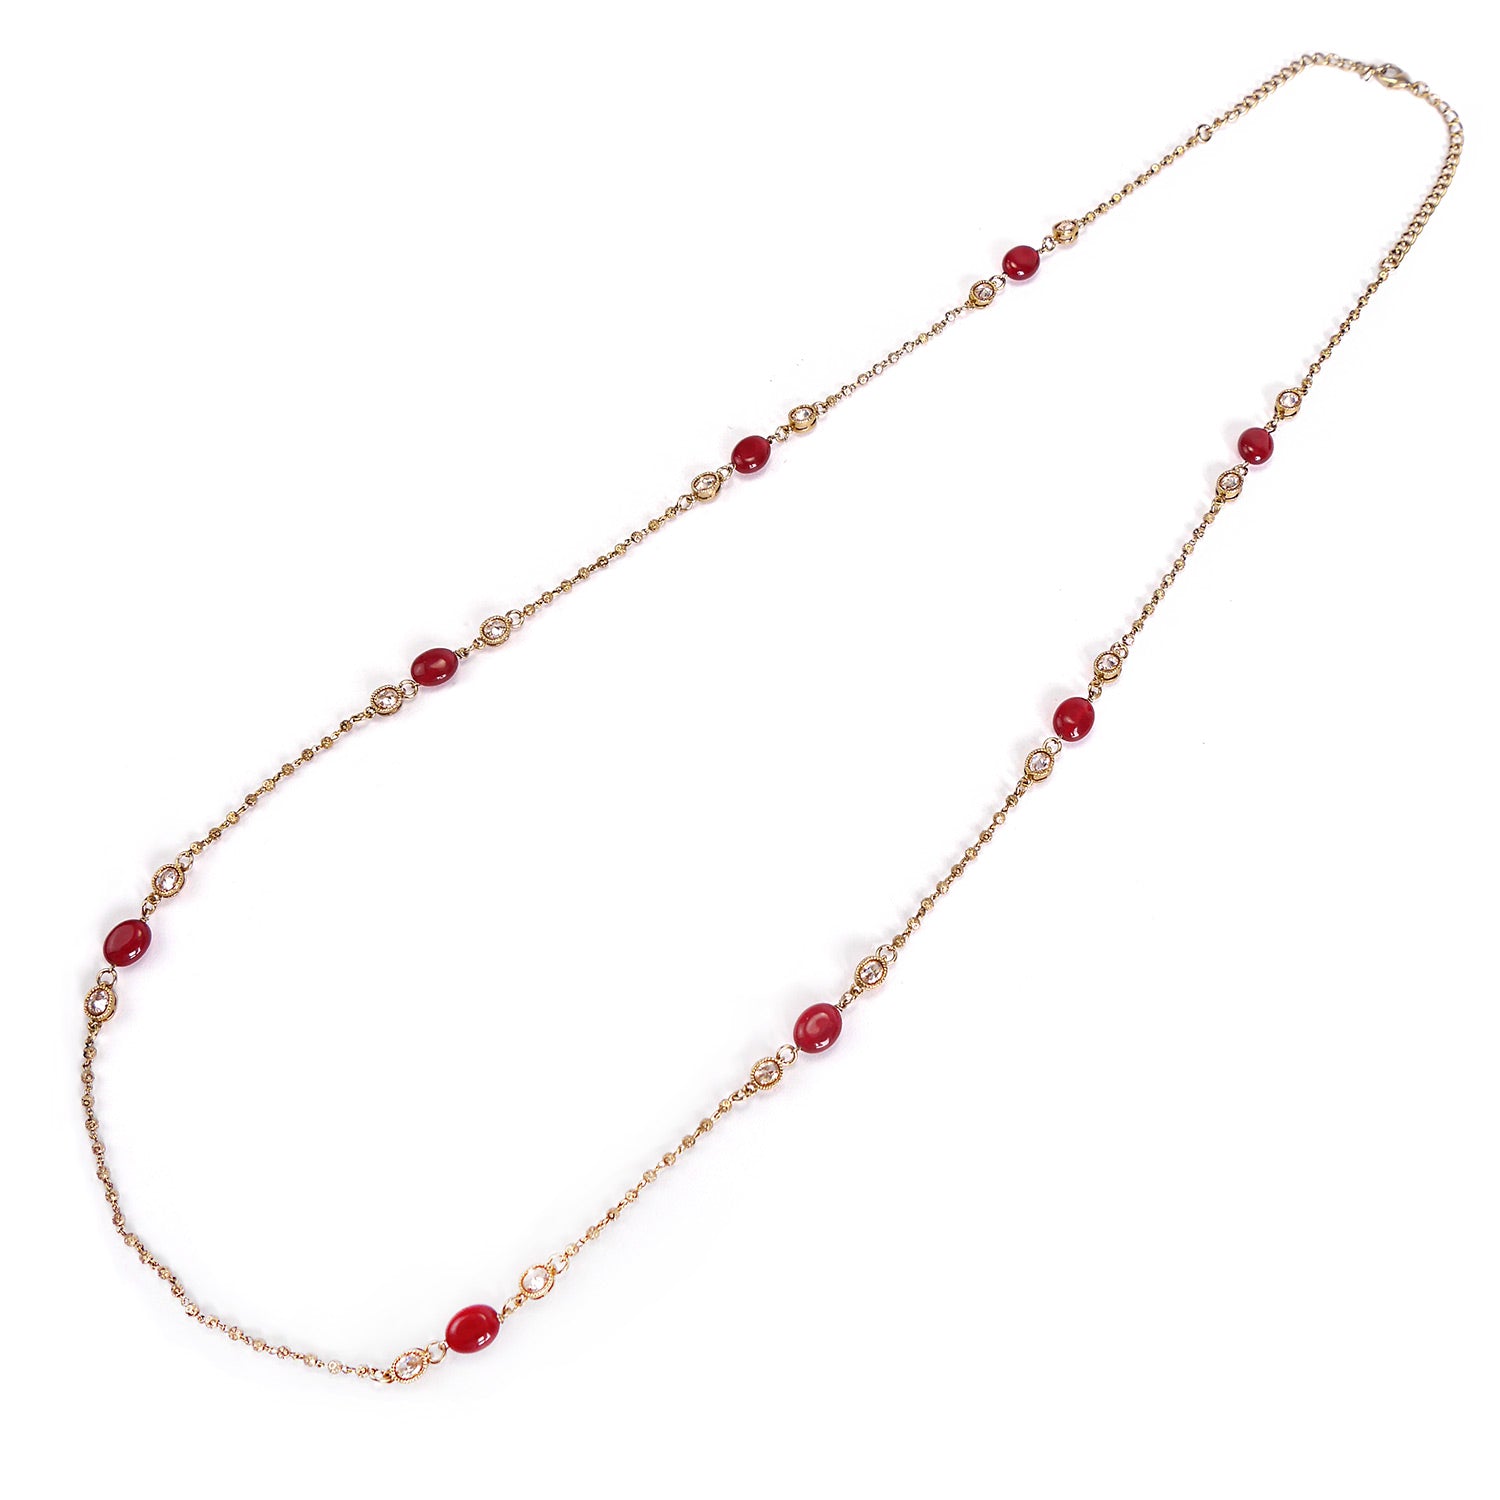 Ivy Long Chain in Maroon